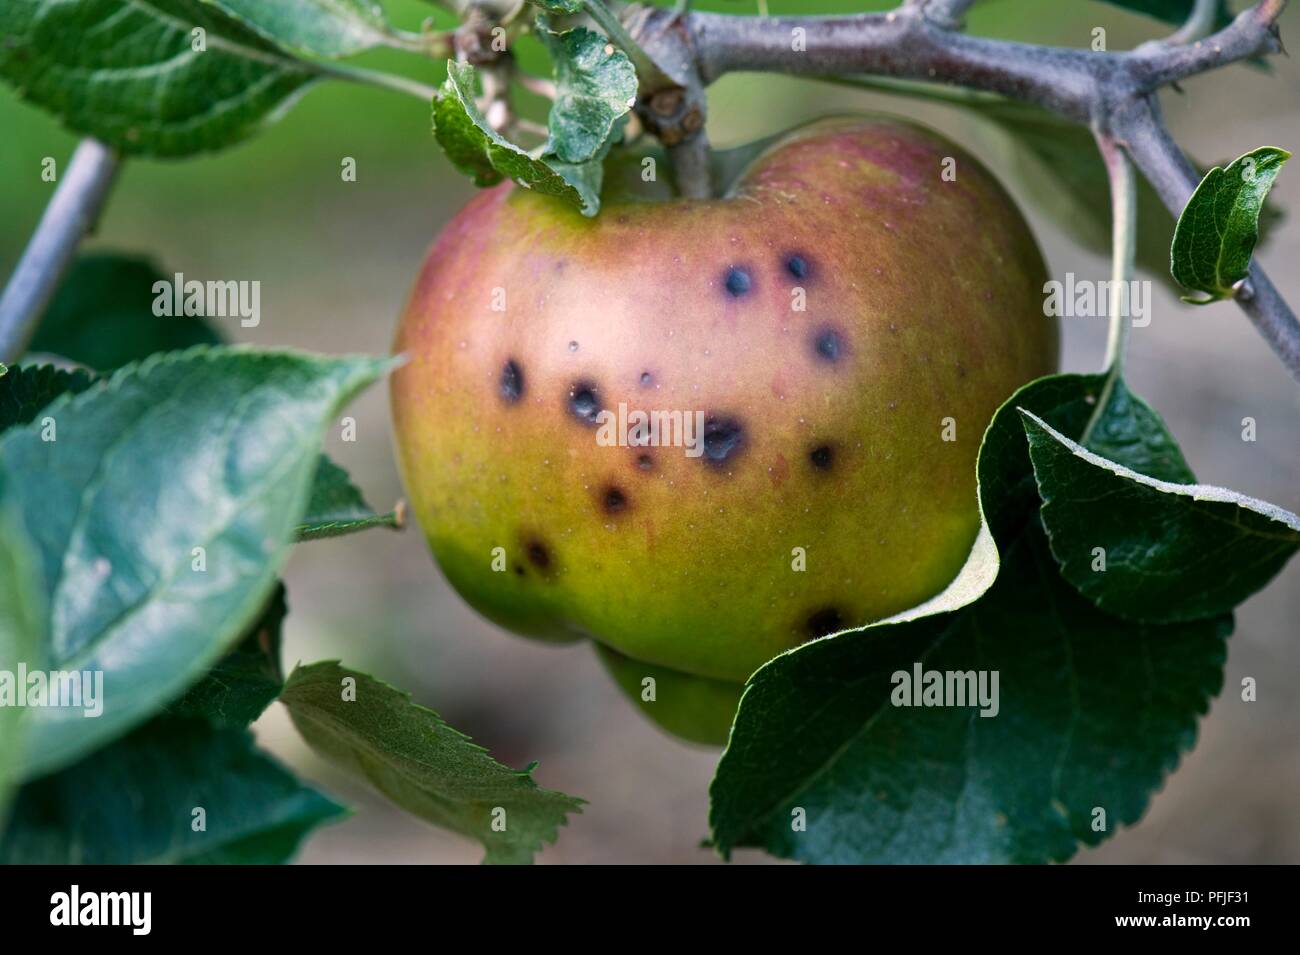 Apple infested with bitter pit, close-up Stock Photo